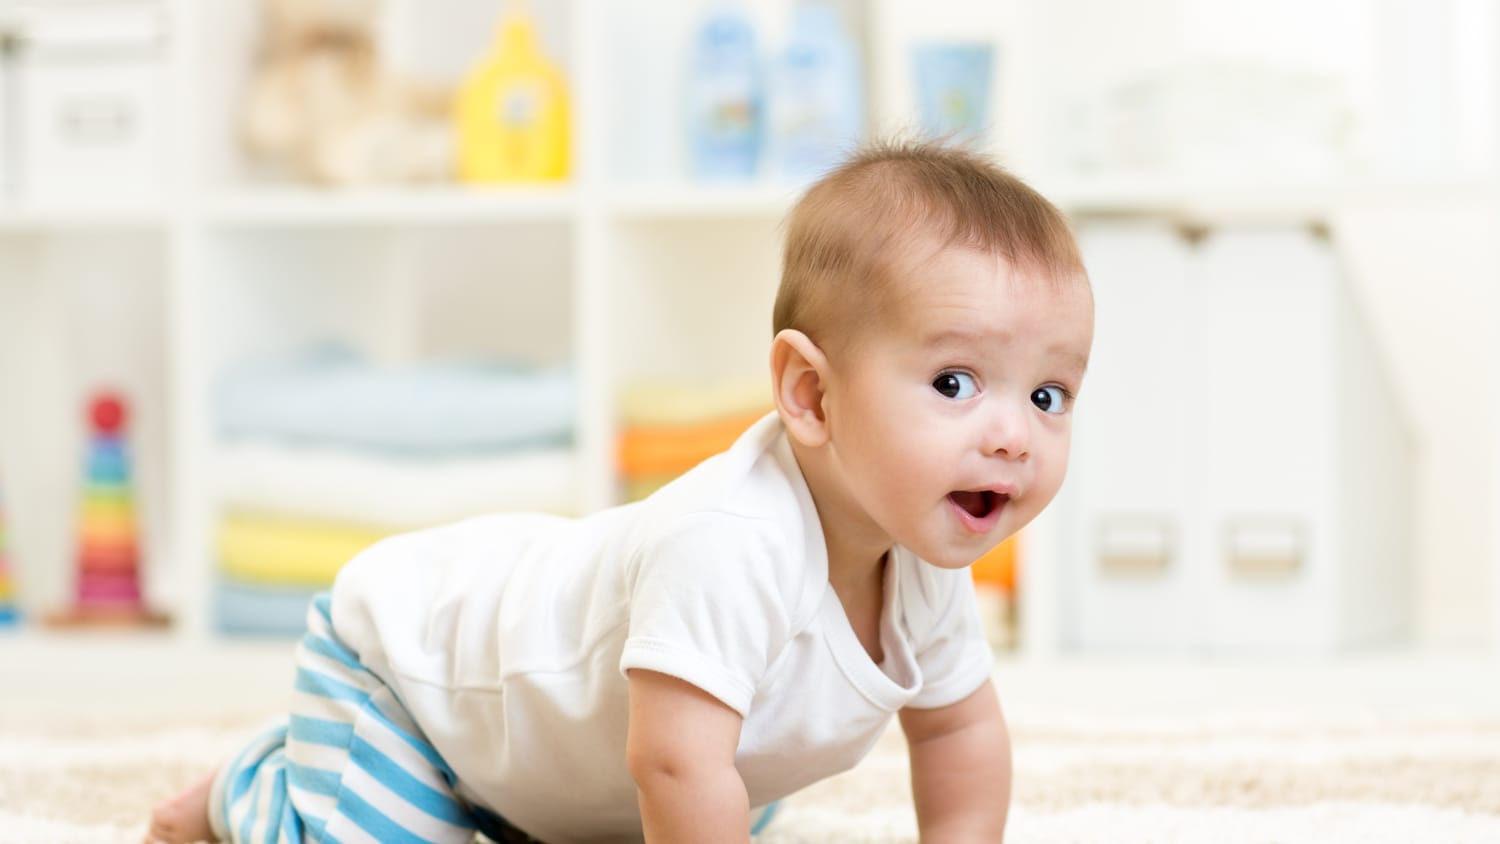 An infant who may have child development issues crawls on the floor.